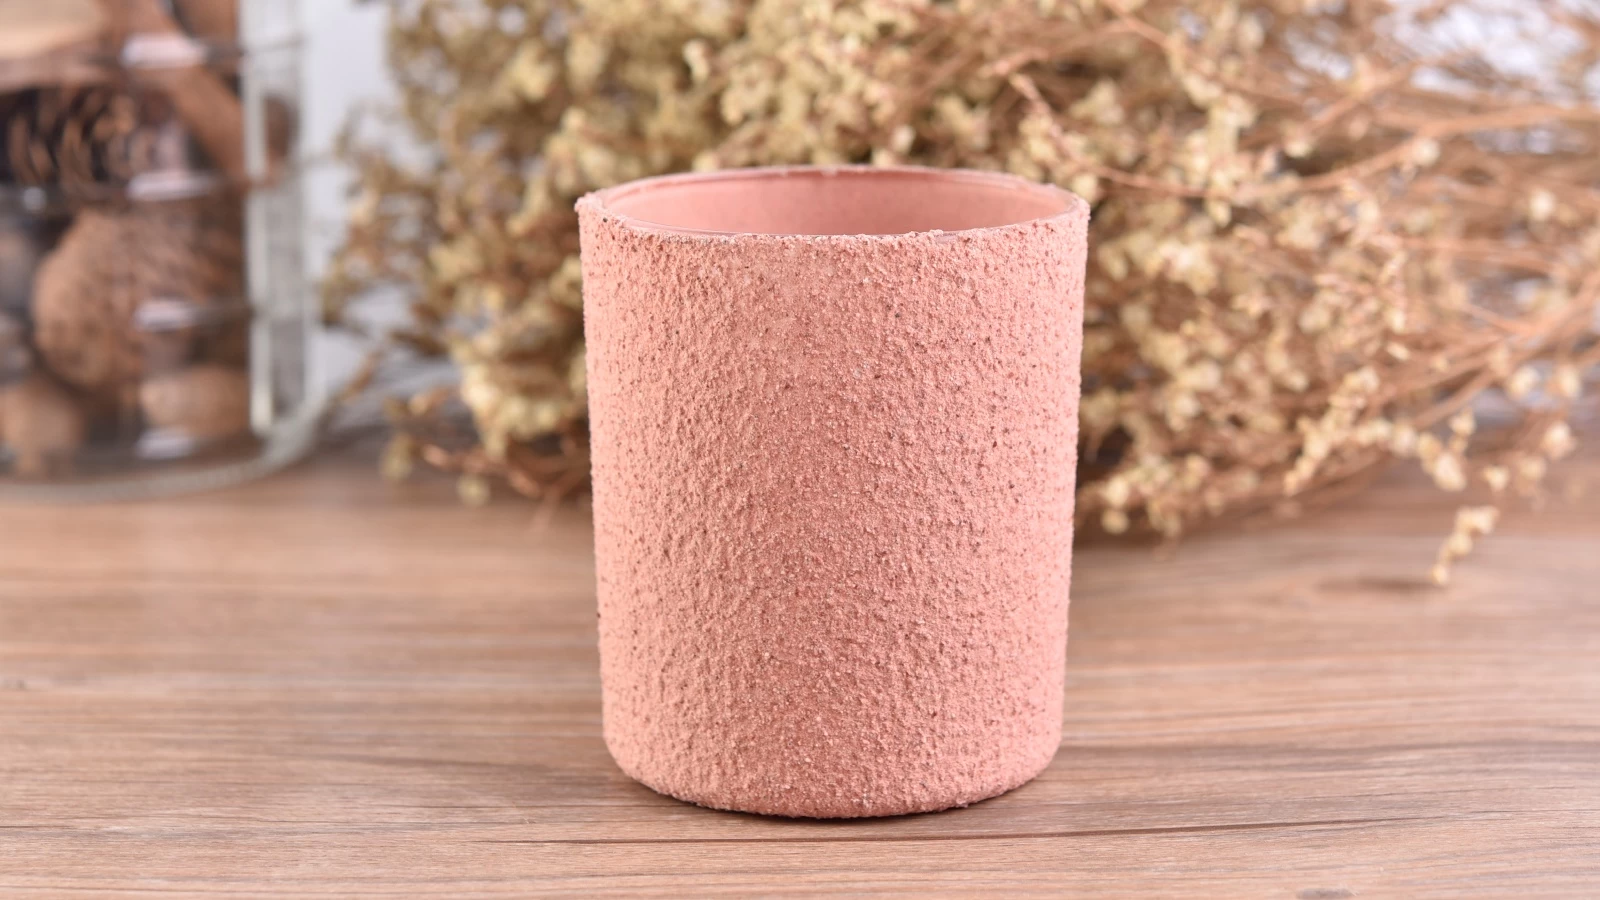 Wholesales Home decor pink cylinder decorative empty cement candle vessel